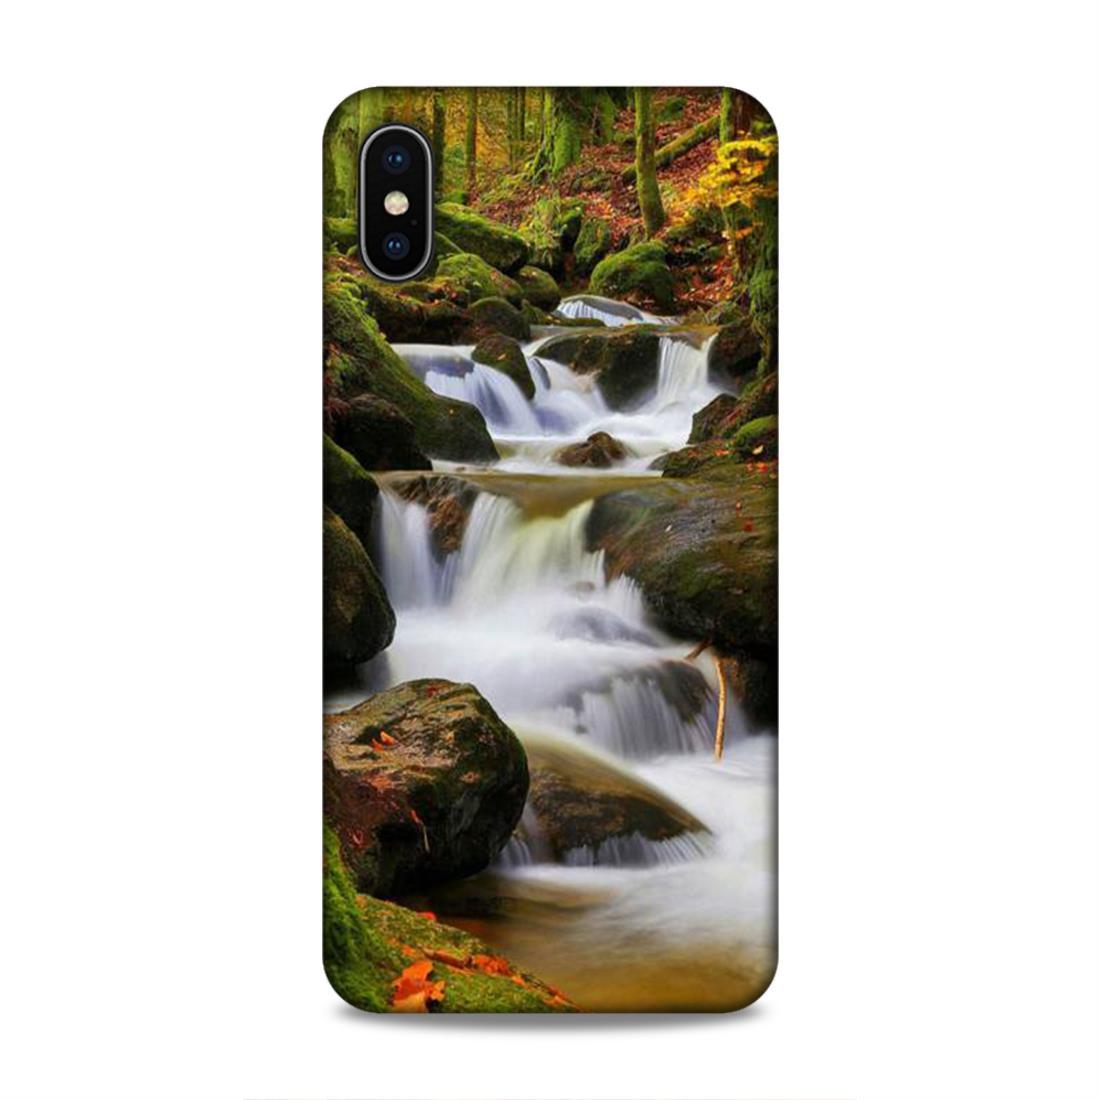 Natural Waterfall iPhone XS Max Phone Cover Case